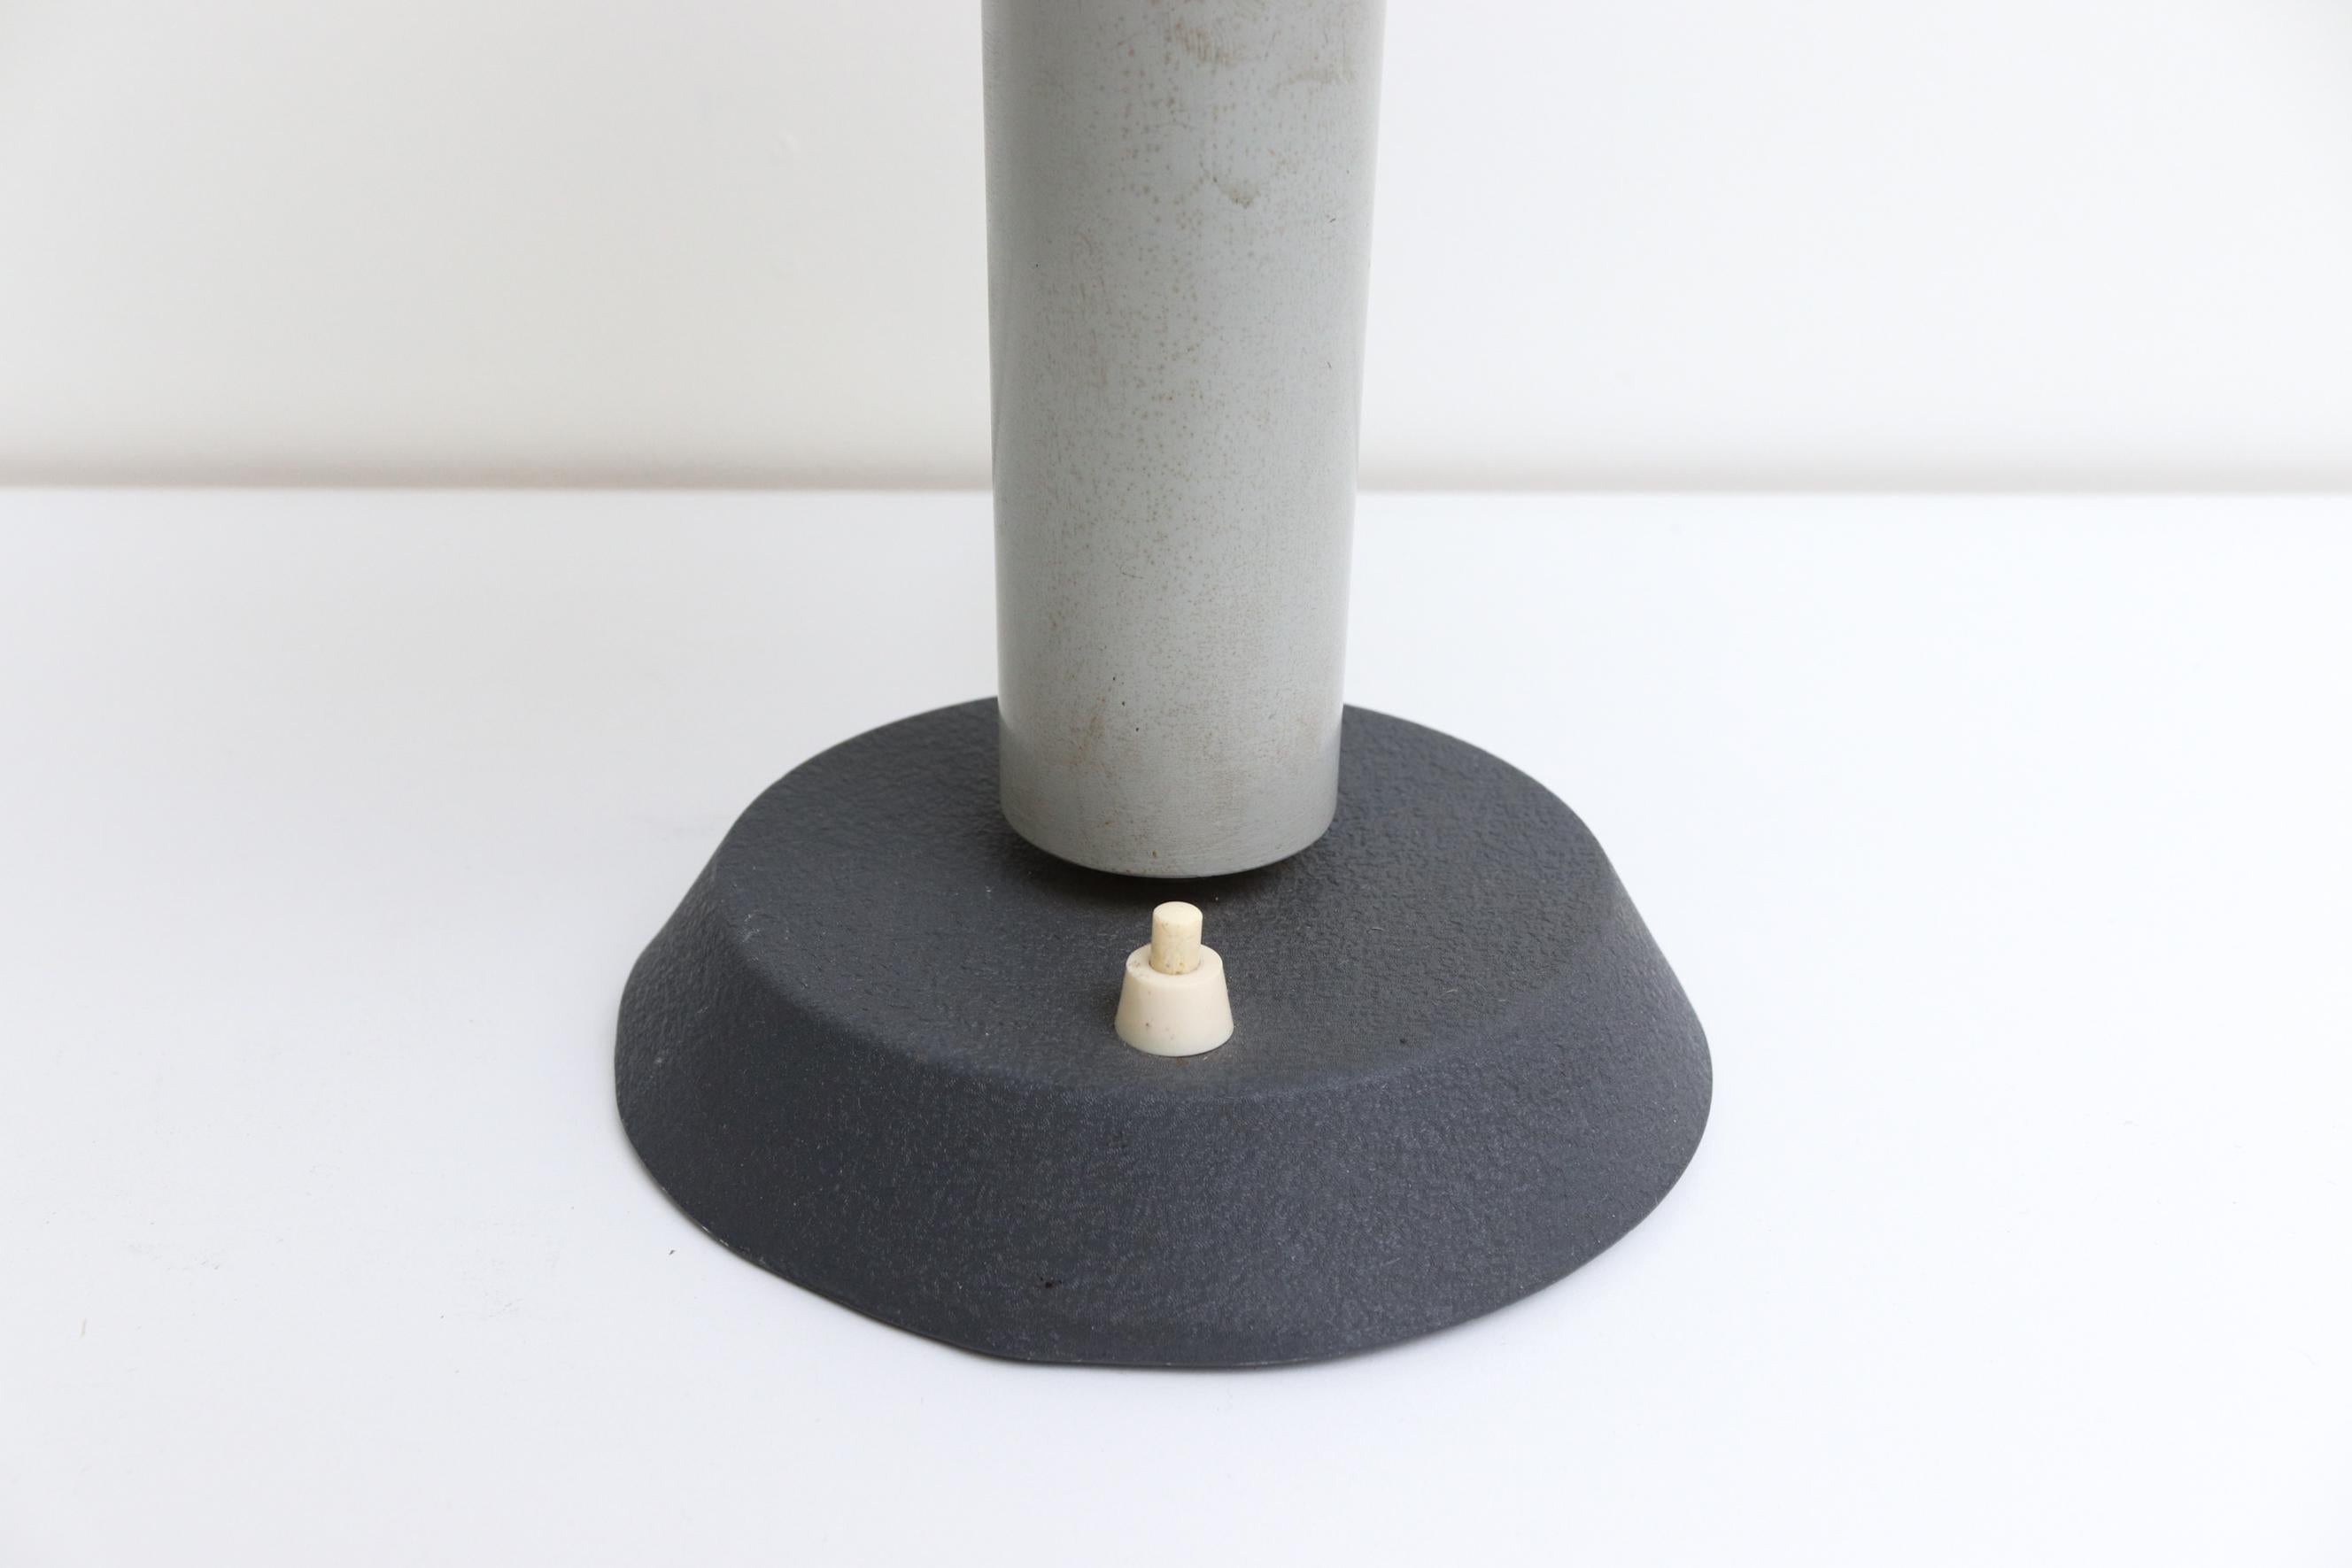 Mid-Century Niek Hiemstra Evolux Table Lamp in Shades of Gray & White, 1960's For Sale 5